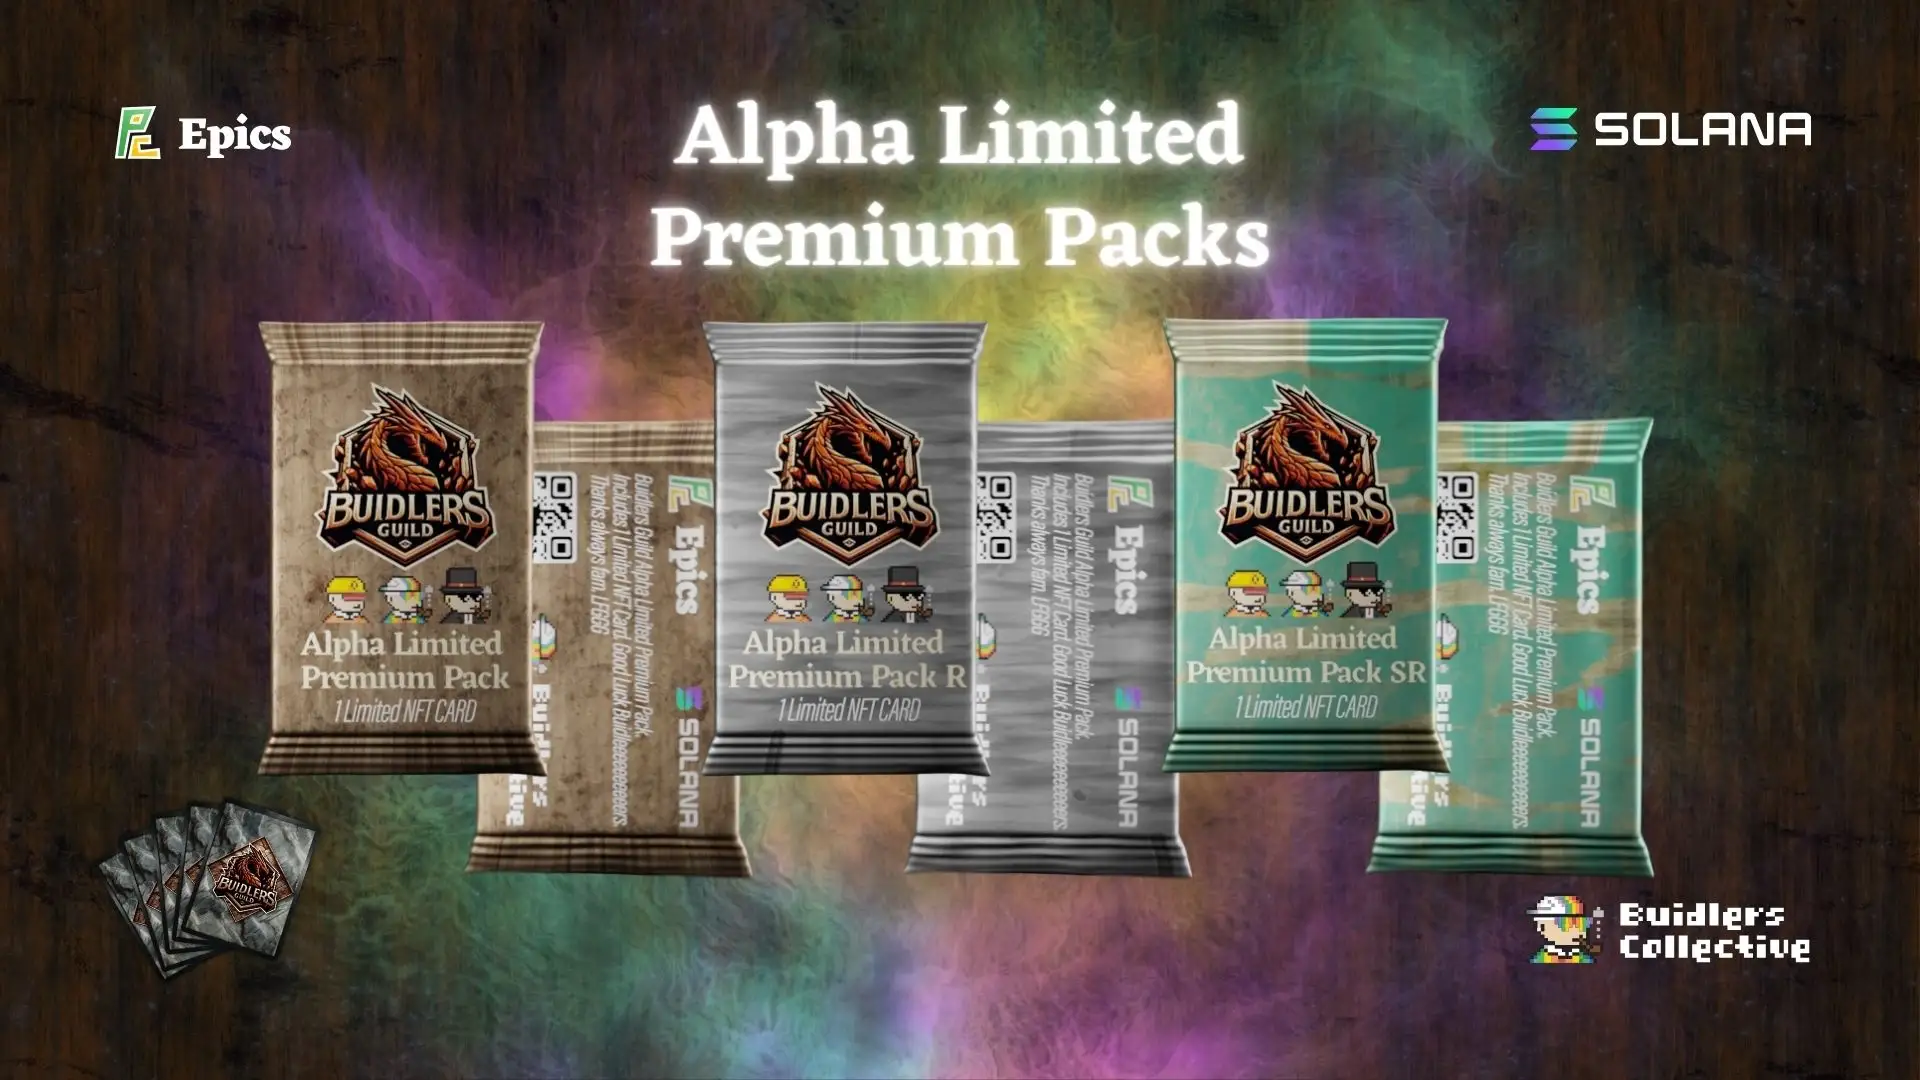 Buidlers Guild Alpha Limited Premium Packの特別キャンペーン